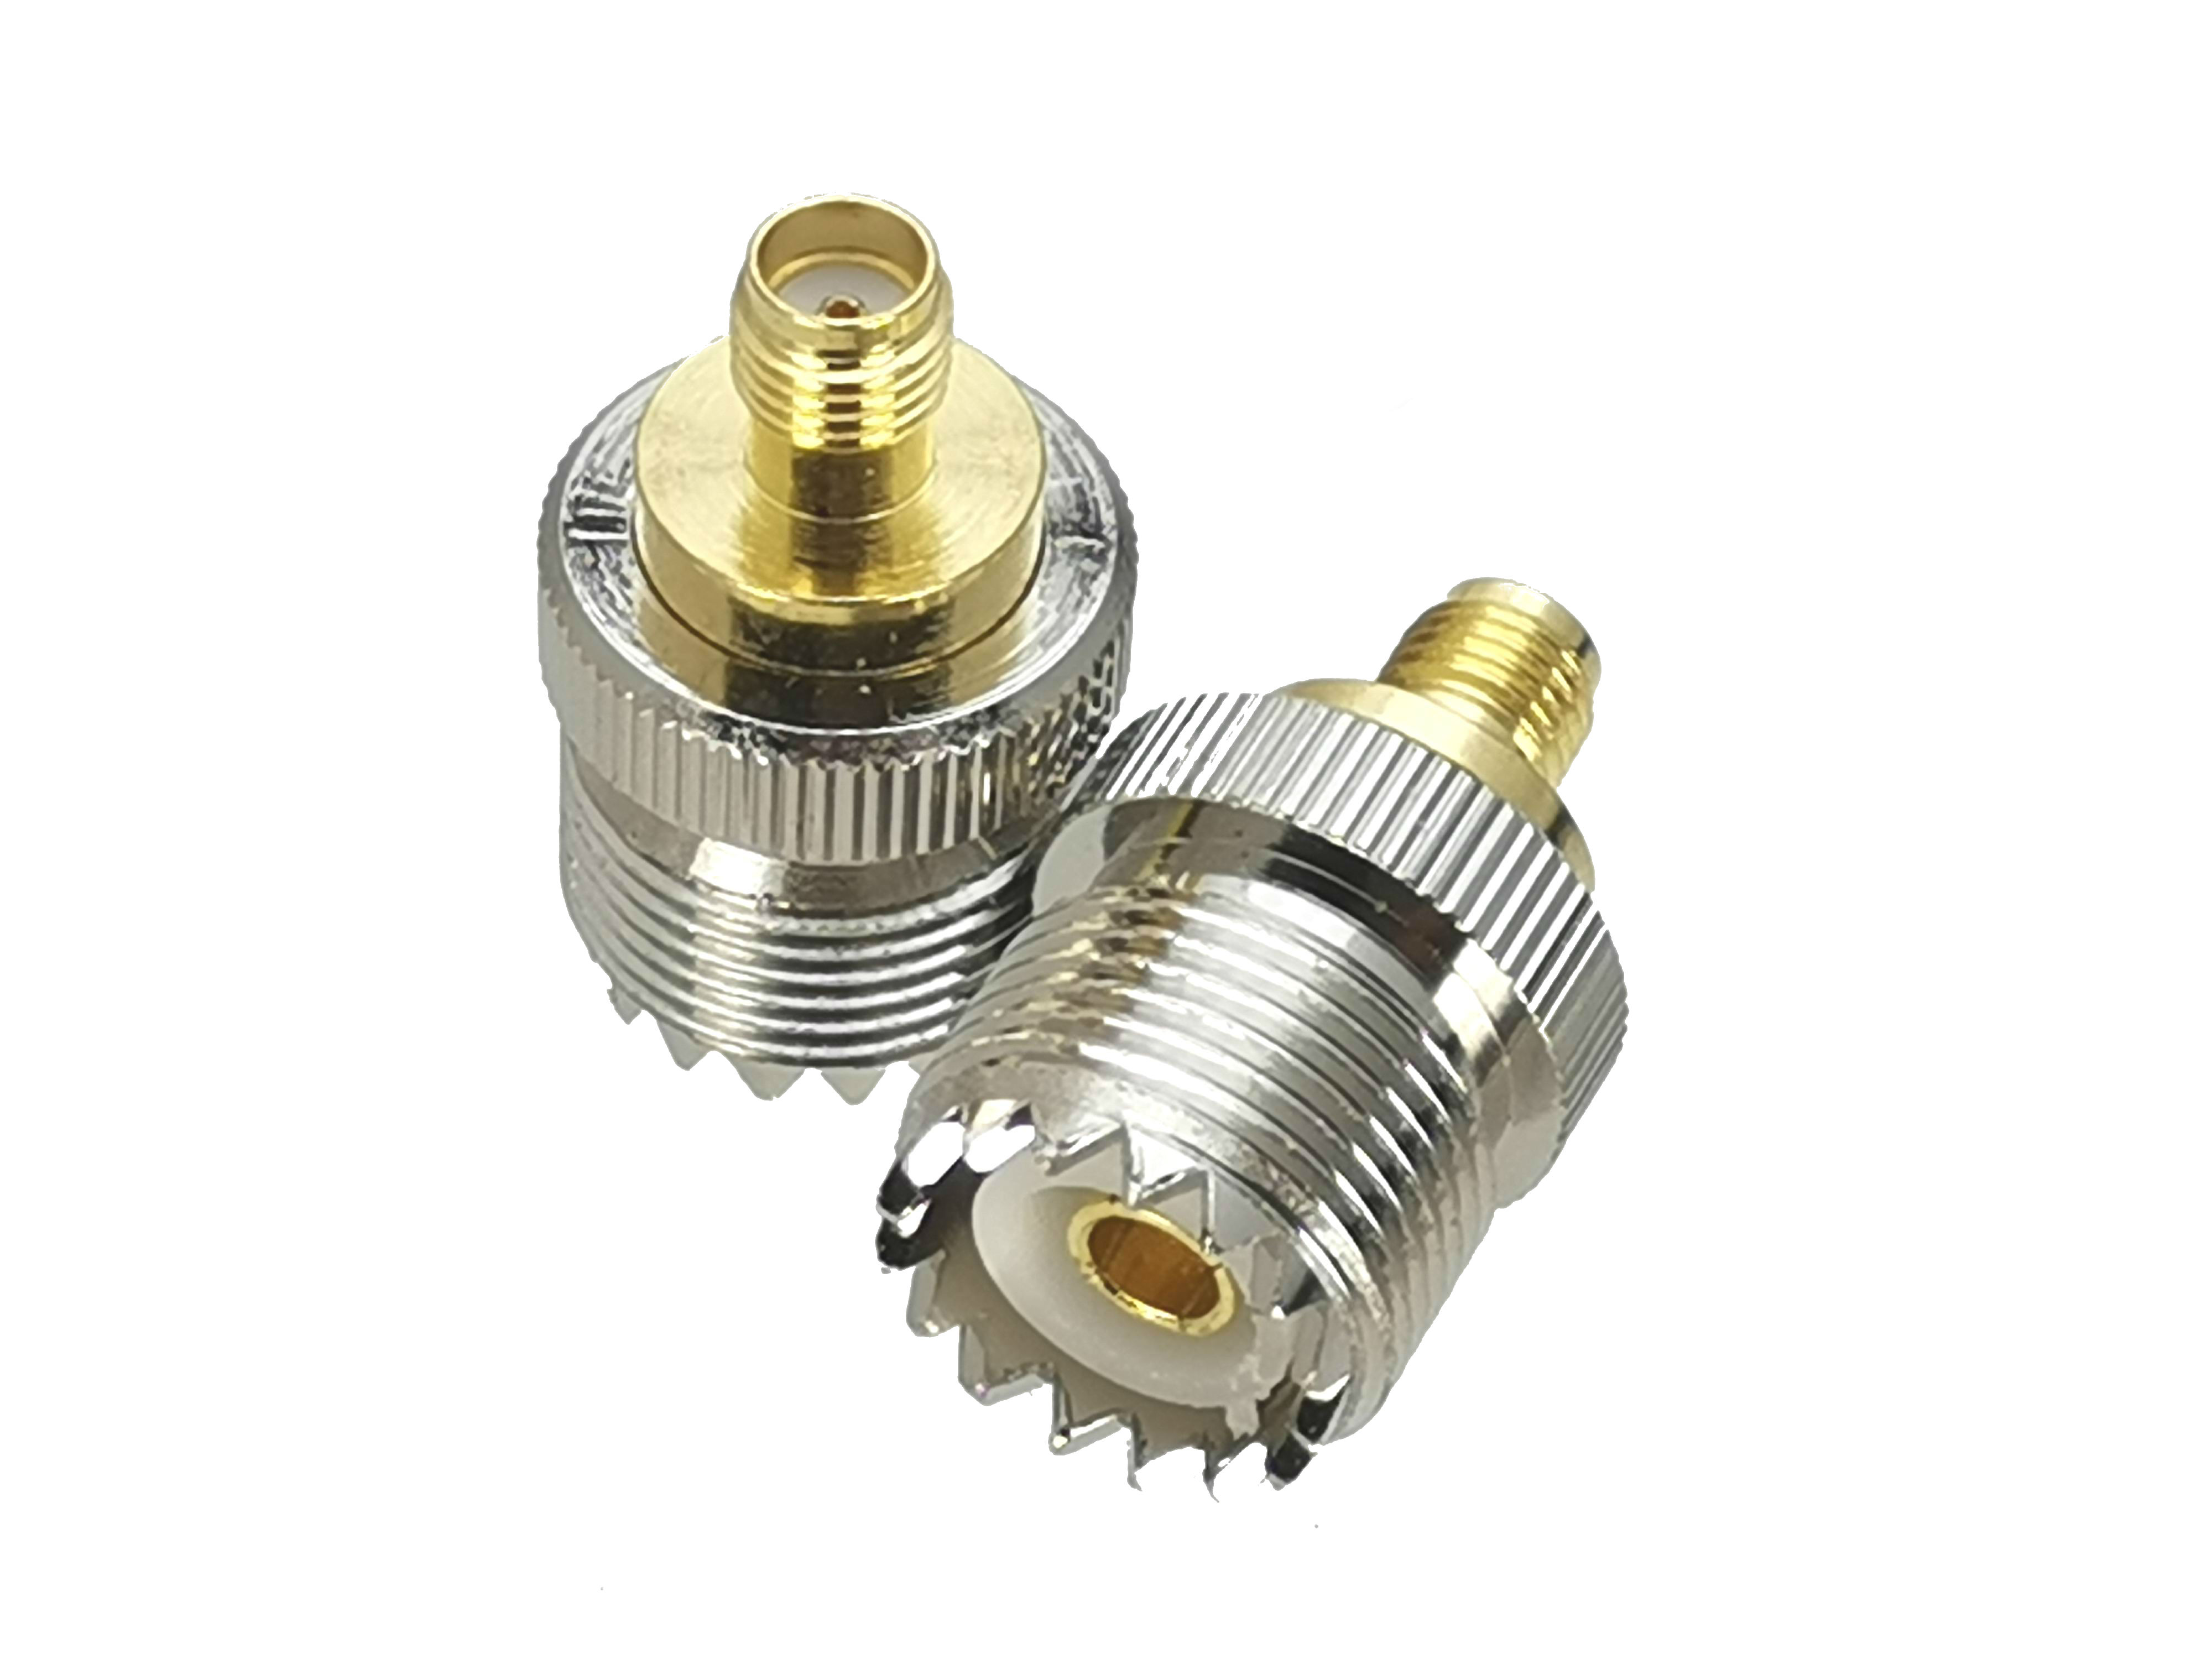 1Pcs SMA to SMA / RP-SMA / BNC / UHF PL259 SO239 / N / TNC Male plug & Female jack RF Coaxial Adapter connector Test Converter